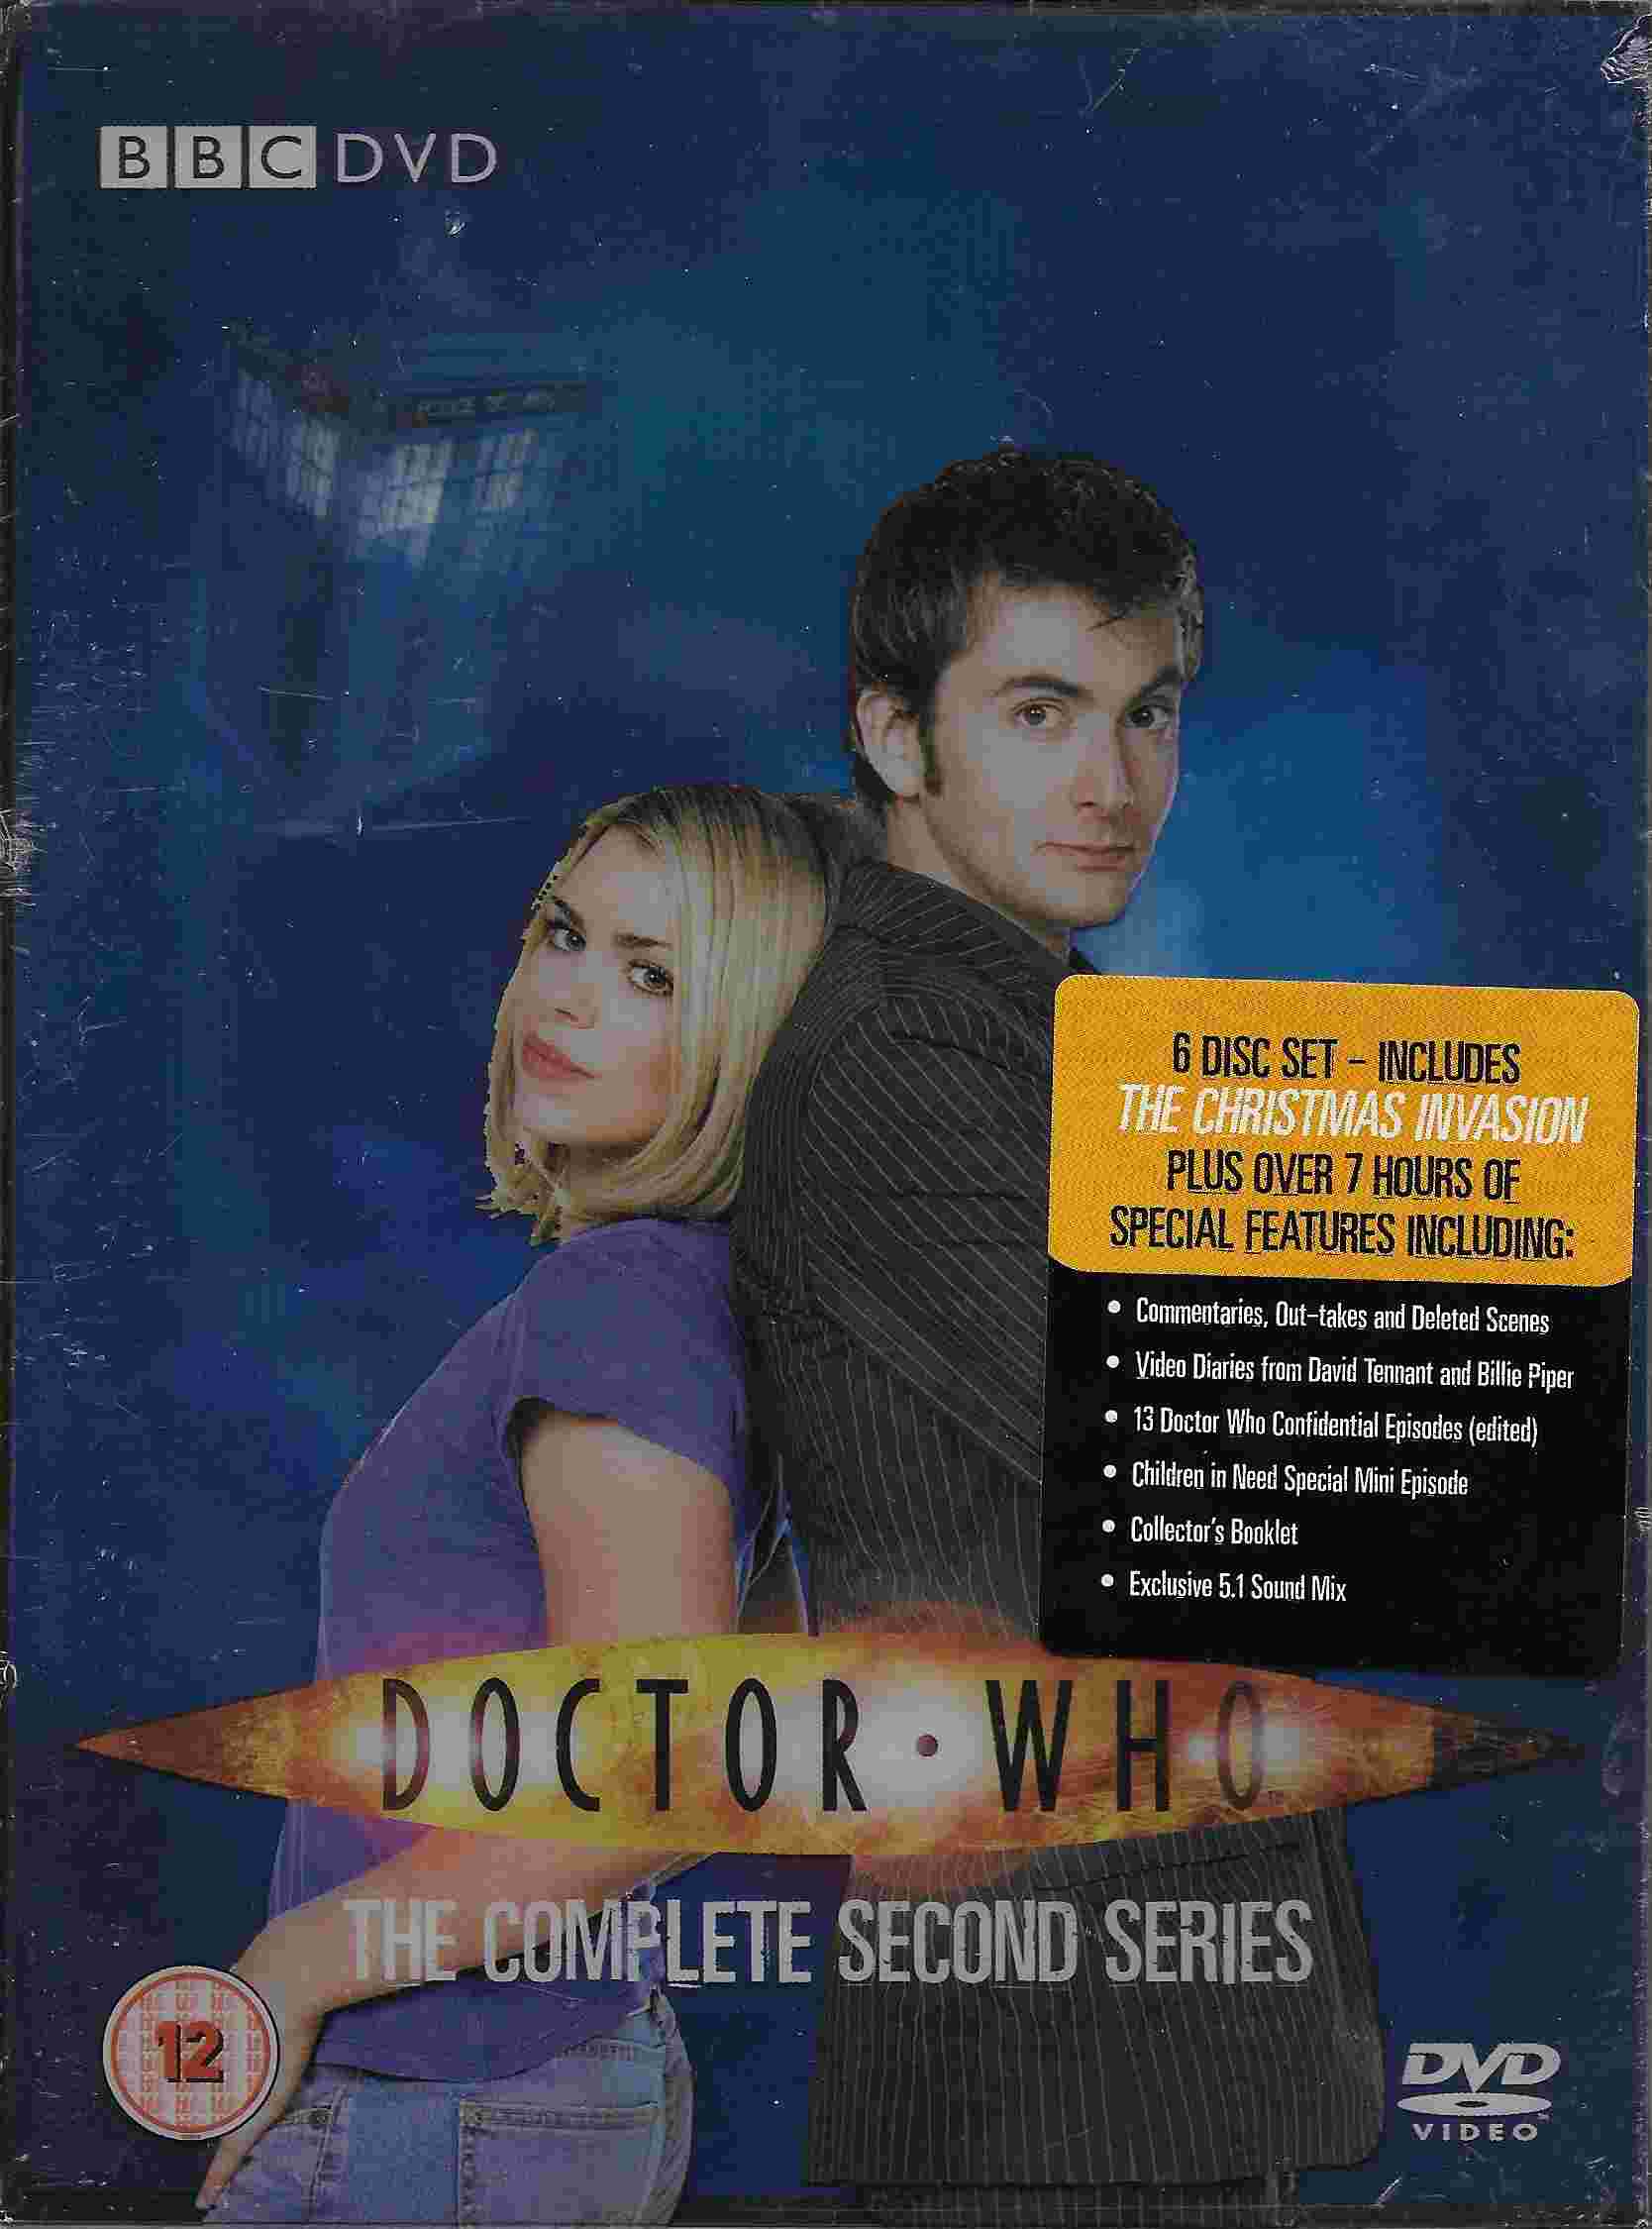 Picture of BBCDVD 2122 Doctor Who - Series 2 by artist Various from the BBC records and Tapes library